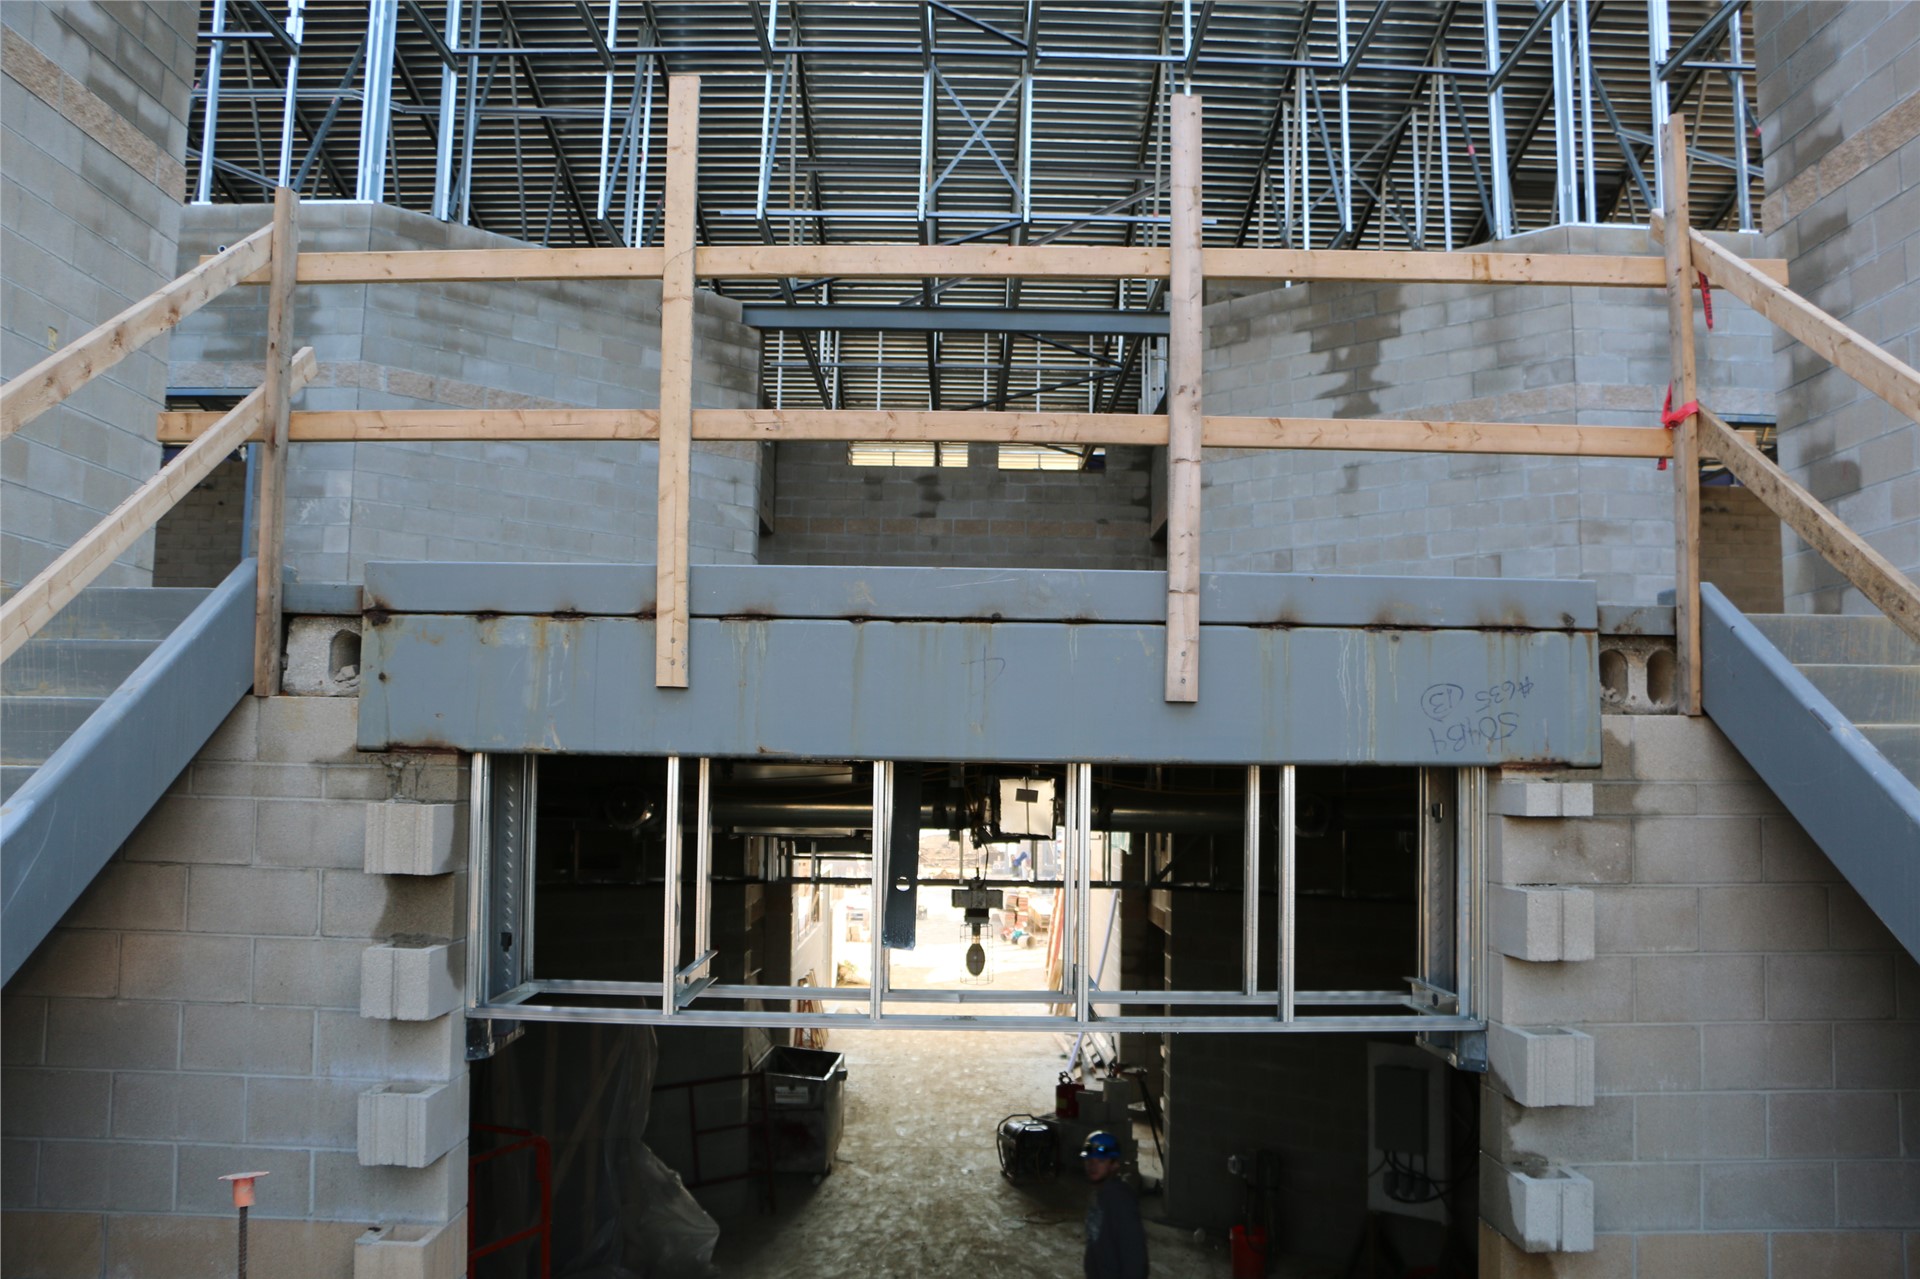 View of first and second floors from the midpoint landing in the academic wing